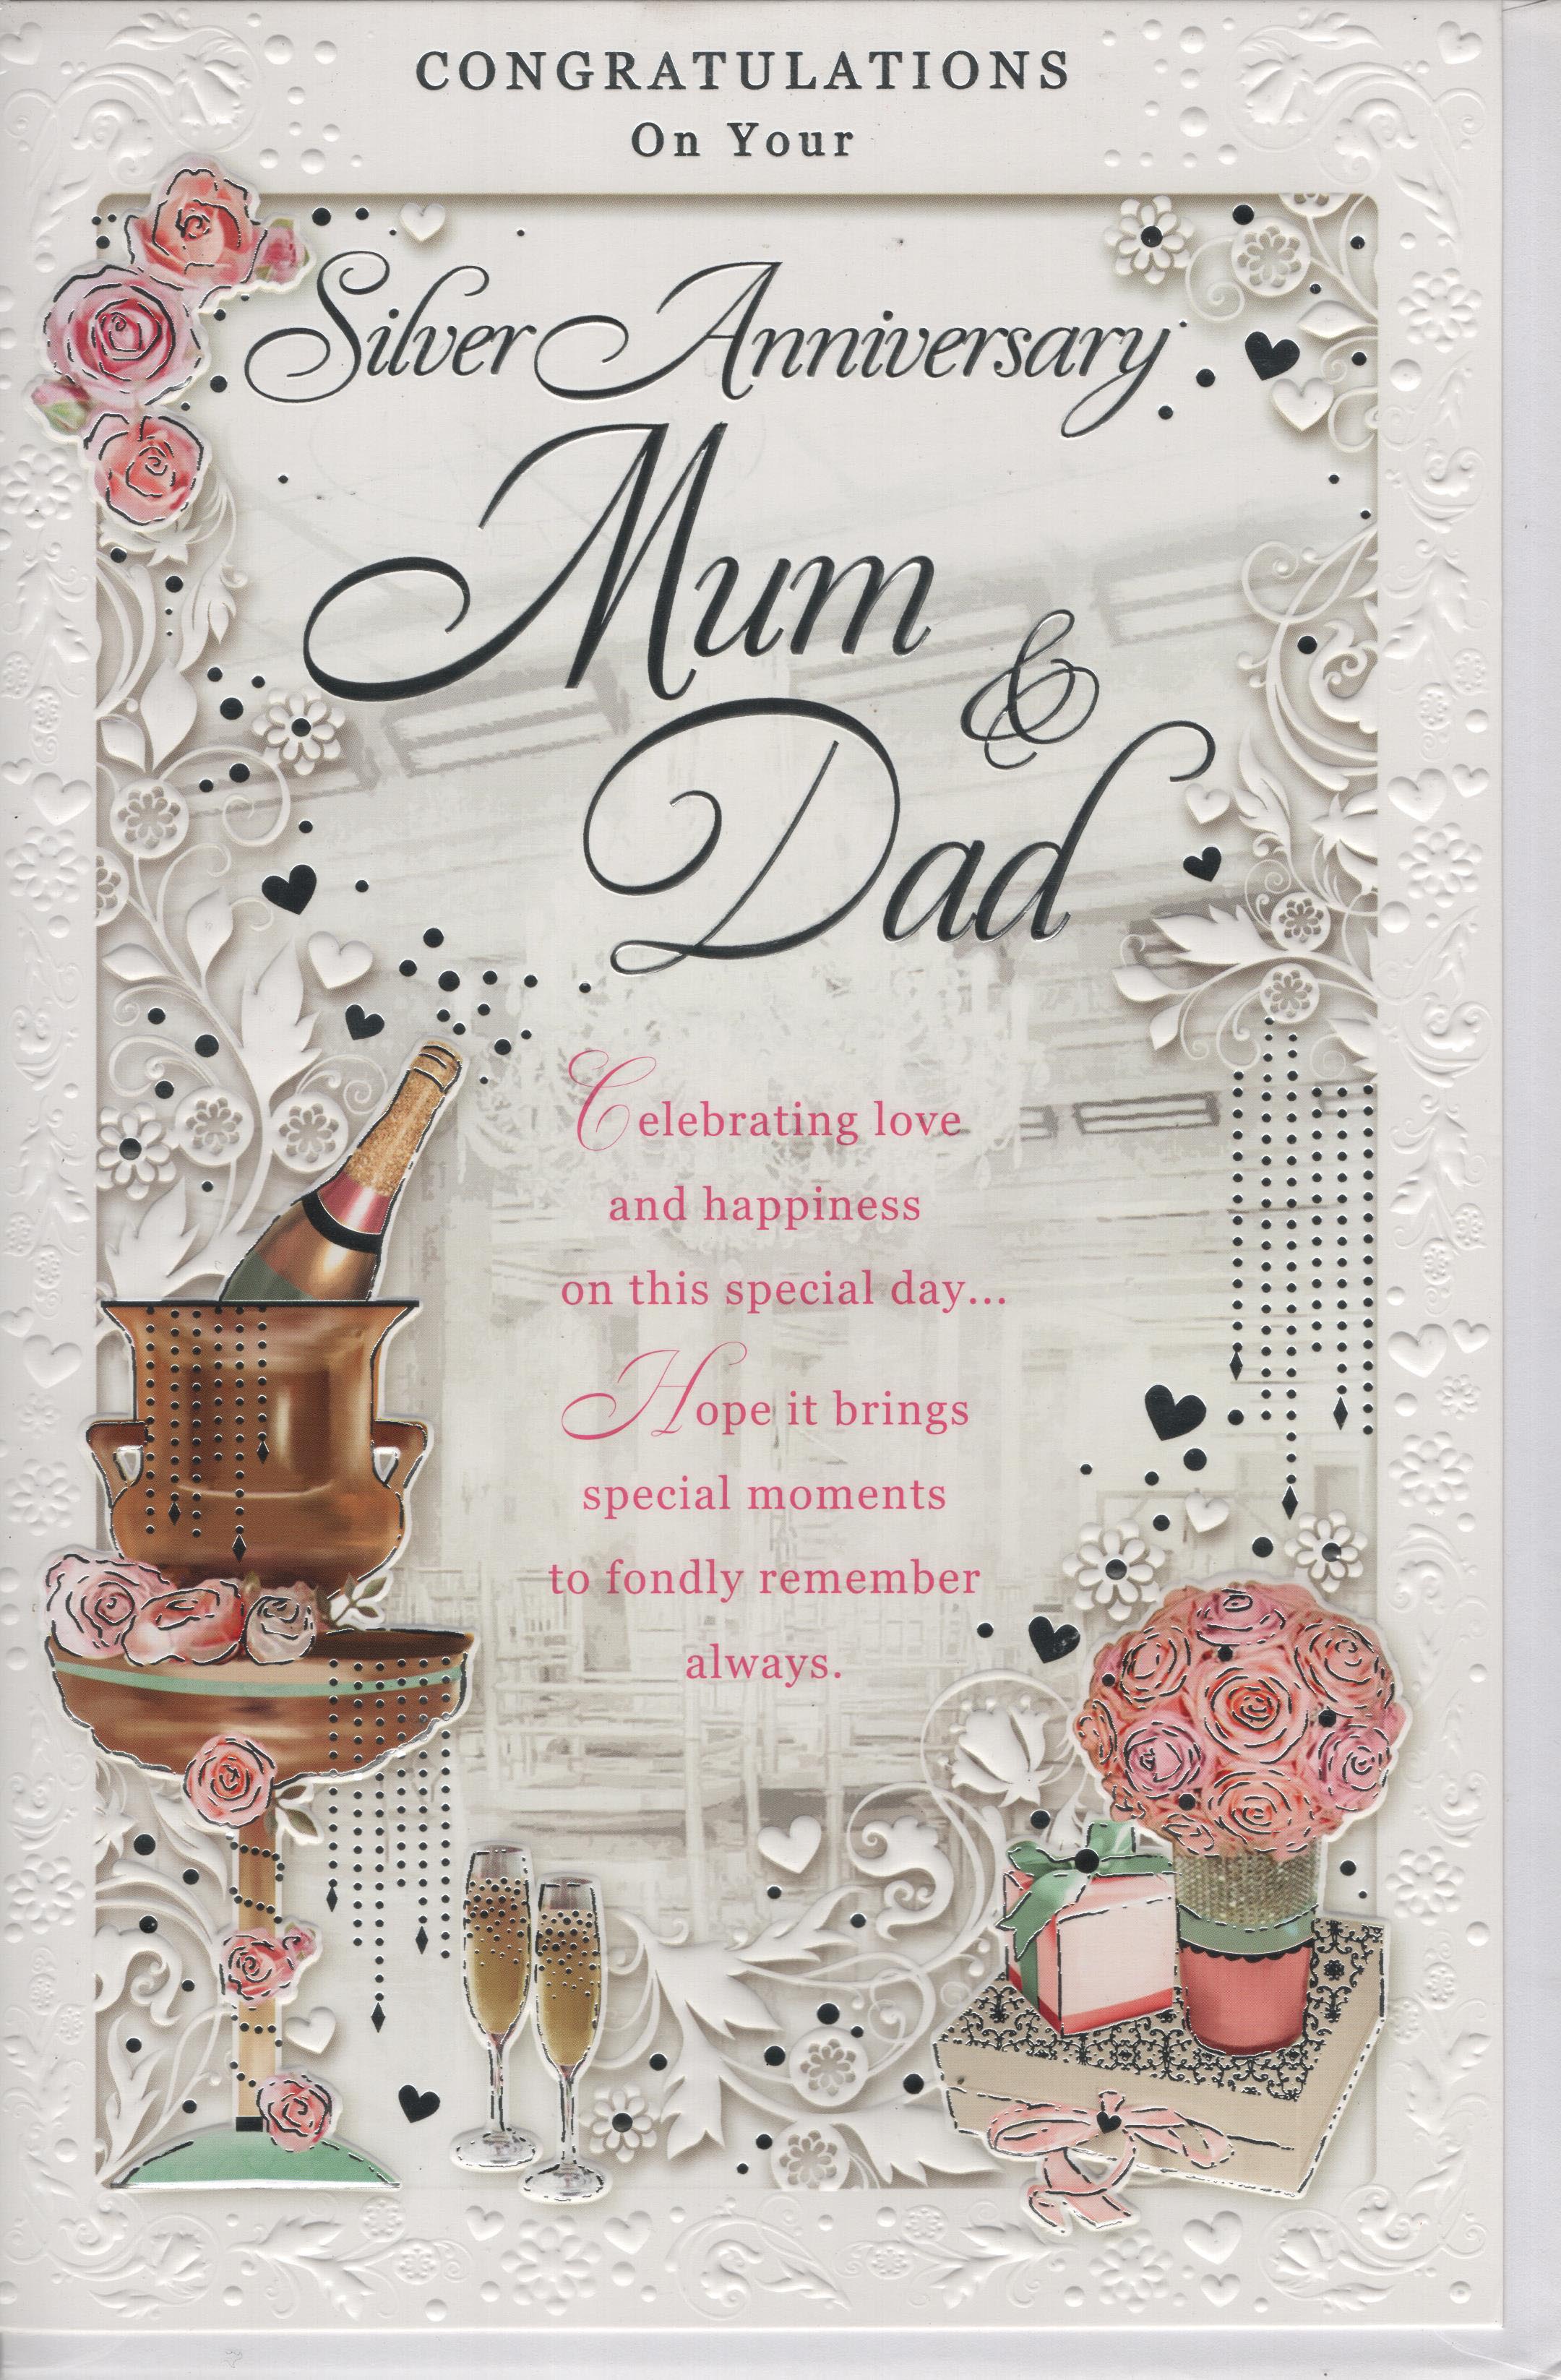 Xpress Yourself Greeting Card : Congratulations On Your Silver Anniversary Mum and Dad